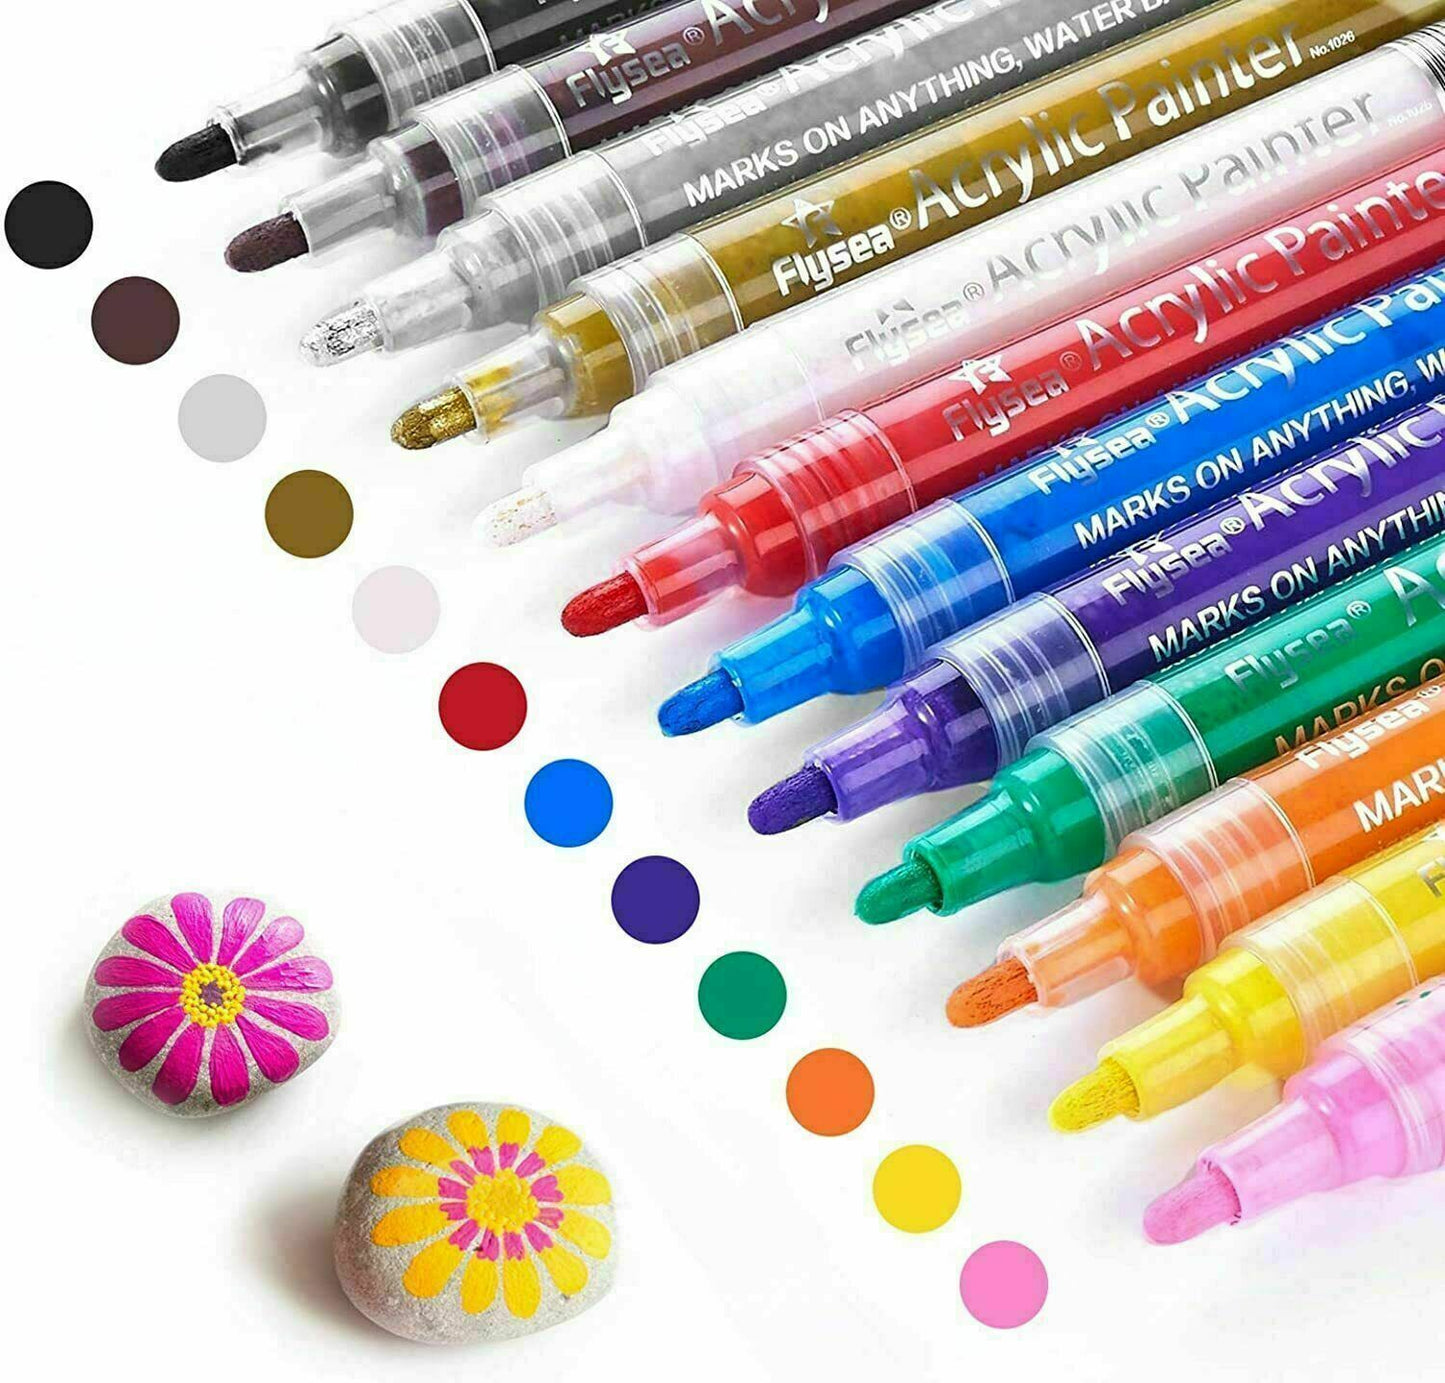 24 Colours Acrylic Paint Pens For Rock Painting Stone Ceramic Glass Rock Markers